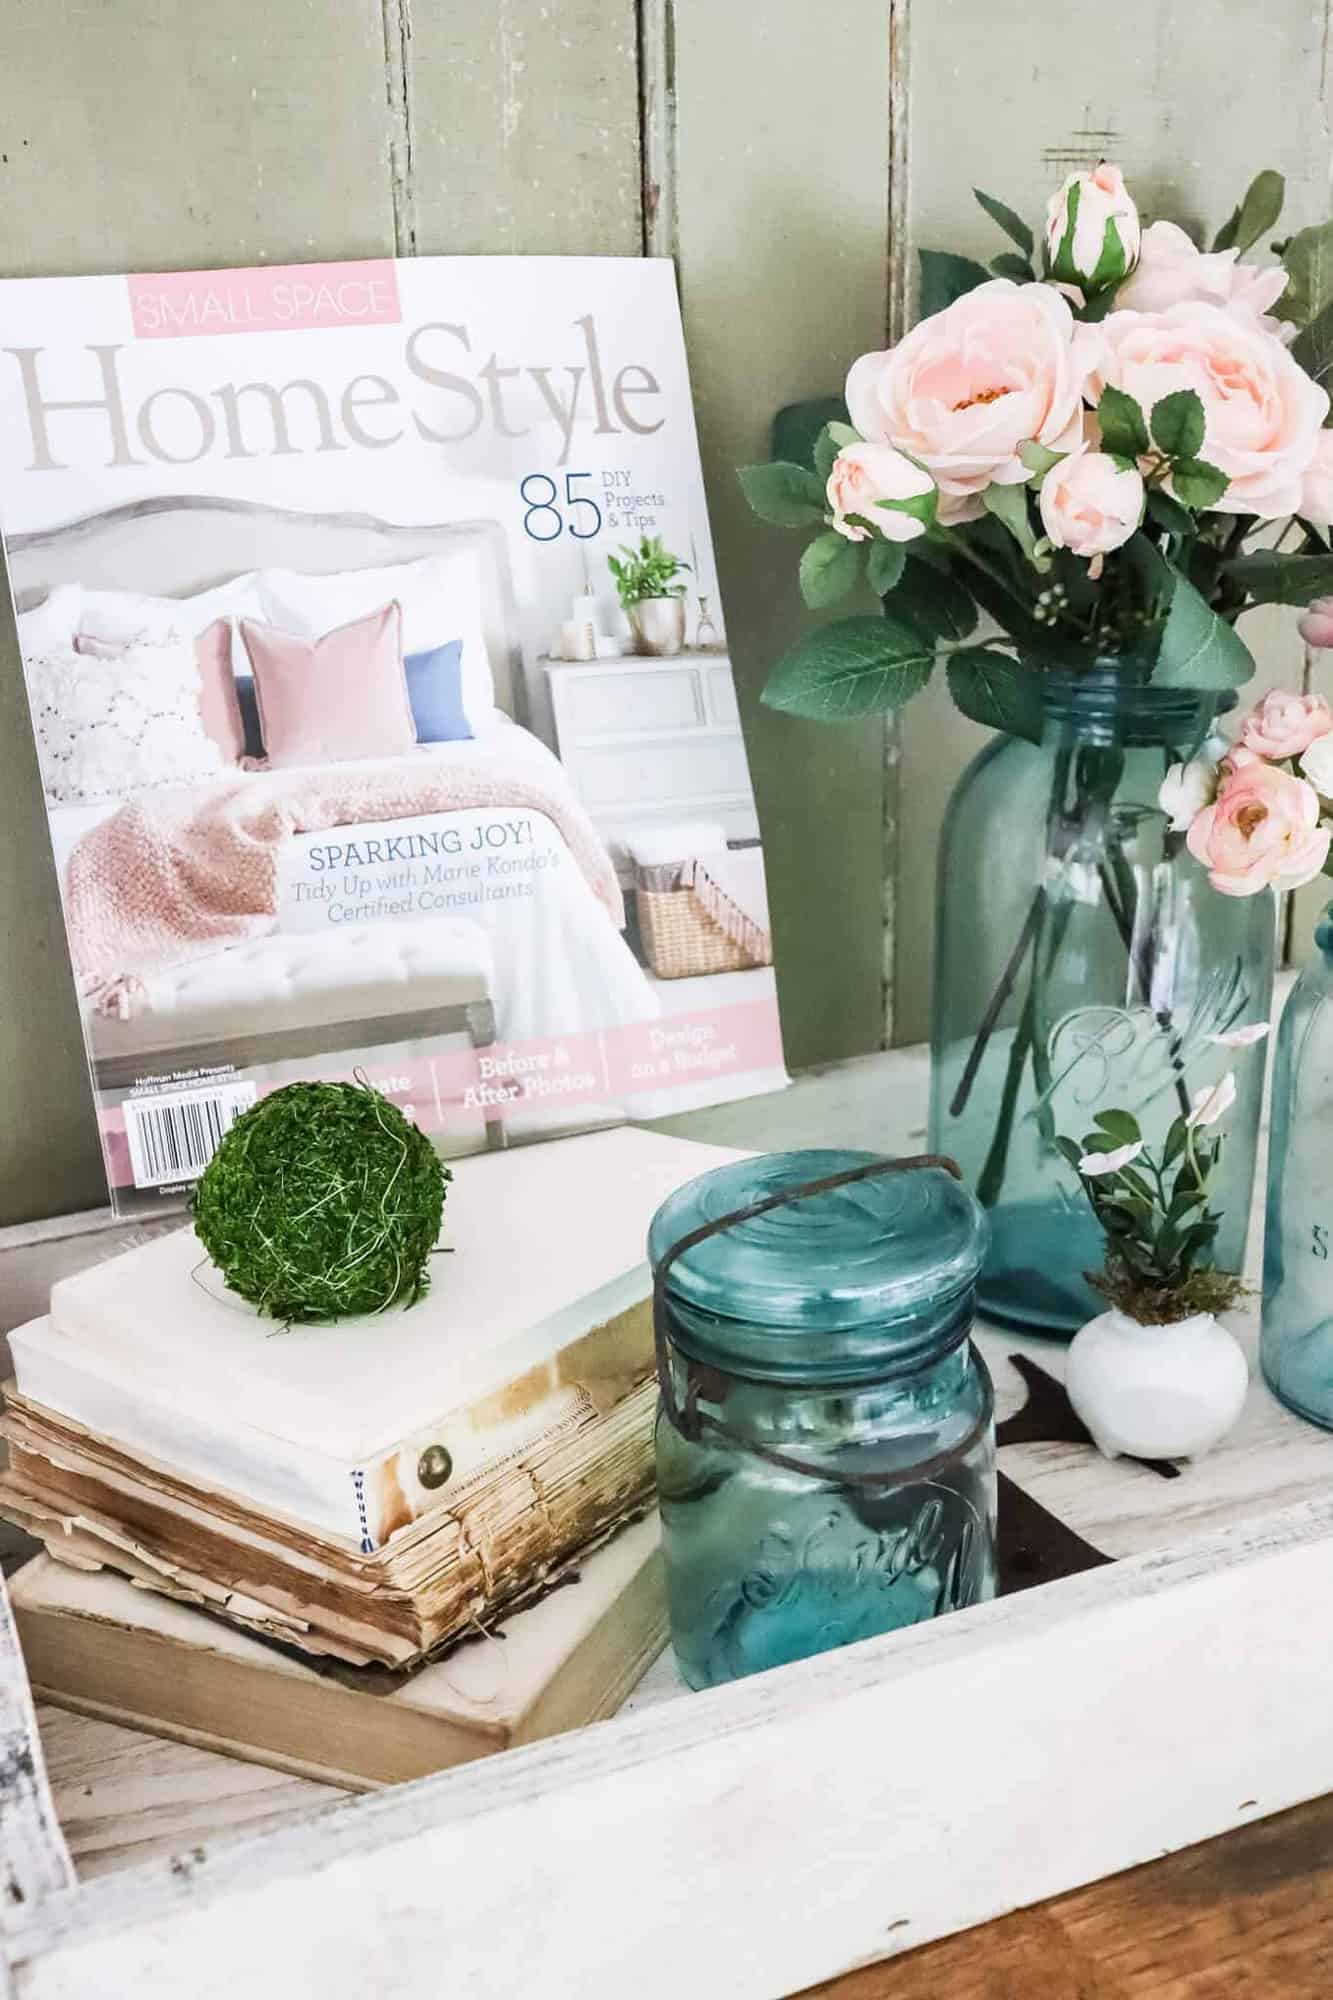 Small Space HomeStyle Magazine next to a tray with unbound books and blue ball jars filled with pink roses